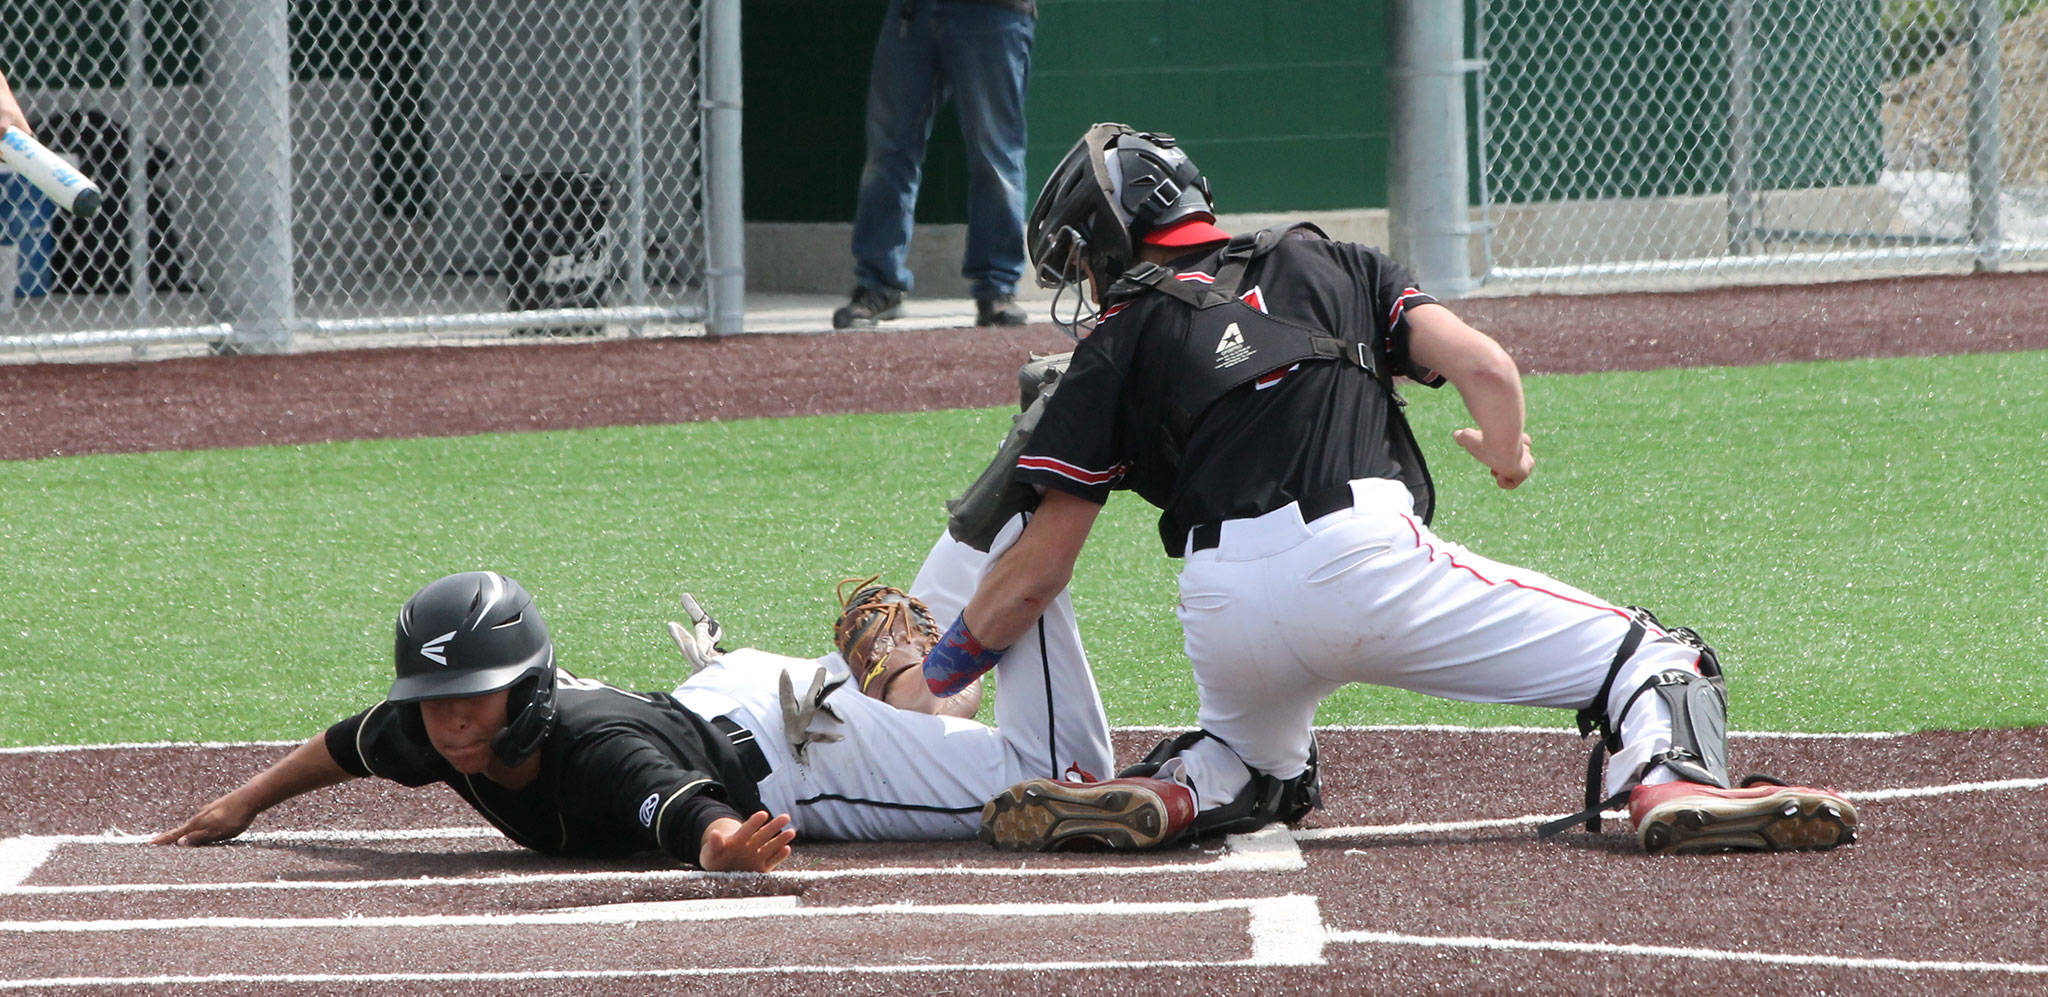 Will action like this — Coupeville catcher Gavin Knoblich putting the tag on a Meridian runner in the playoffs last spring — happen this season? (Photo by Jim Waller/Whidbey News-Times)